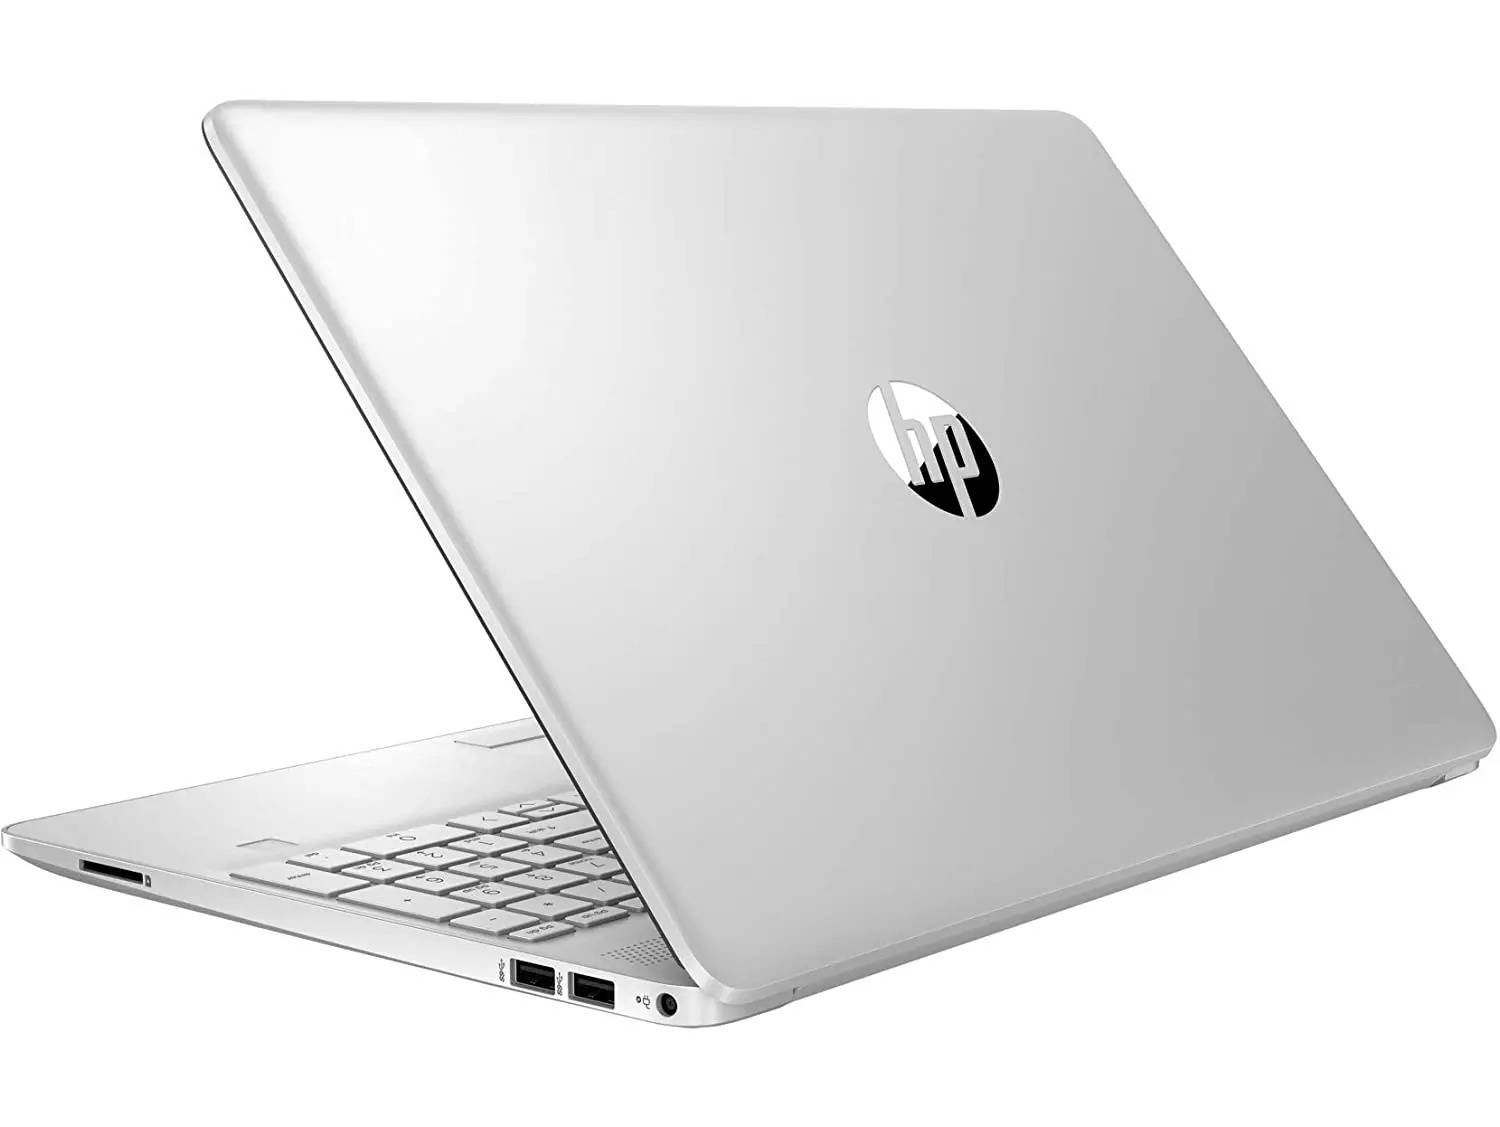 HP 15 Thin &amp; Light 15.6-inch FHD Laptop (11th Gen Intel Core i5-1135G7, 8GB  DDR4, 1TB HDD, Windows 10 Home, MS Office, Integrated Graphics, FPR, -  15s-du3032TU Price in India, Full Specifications (